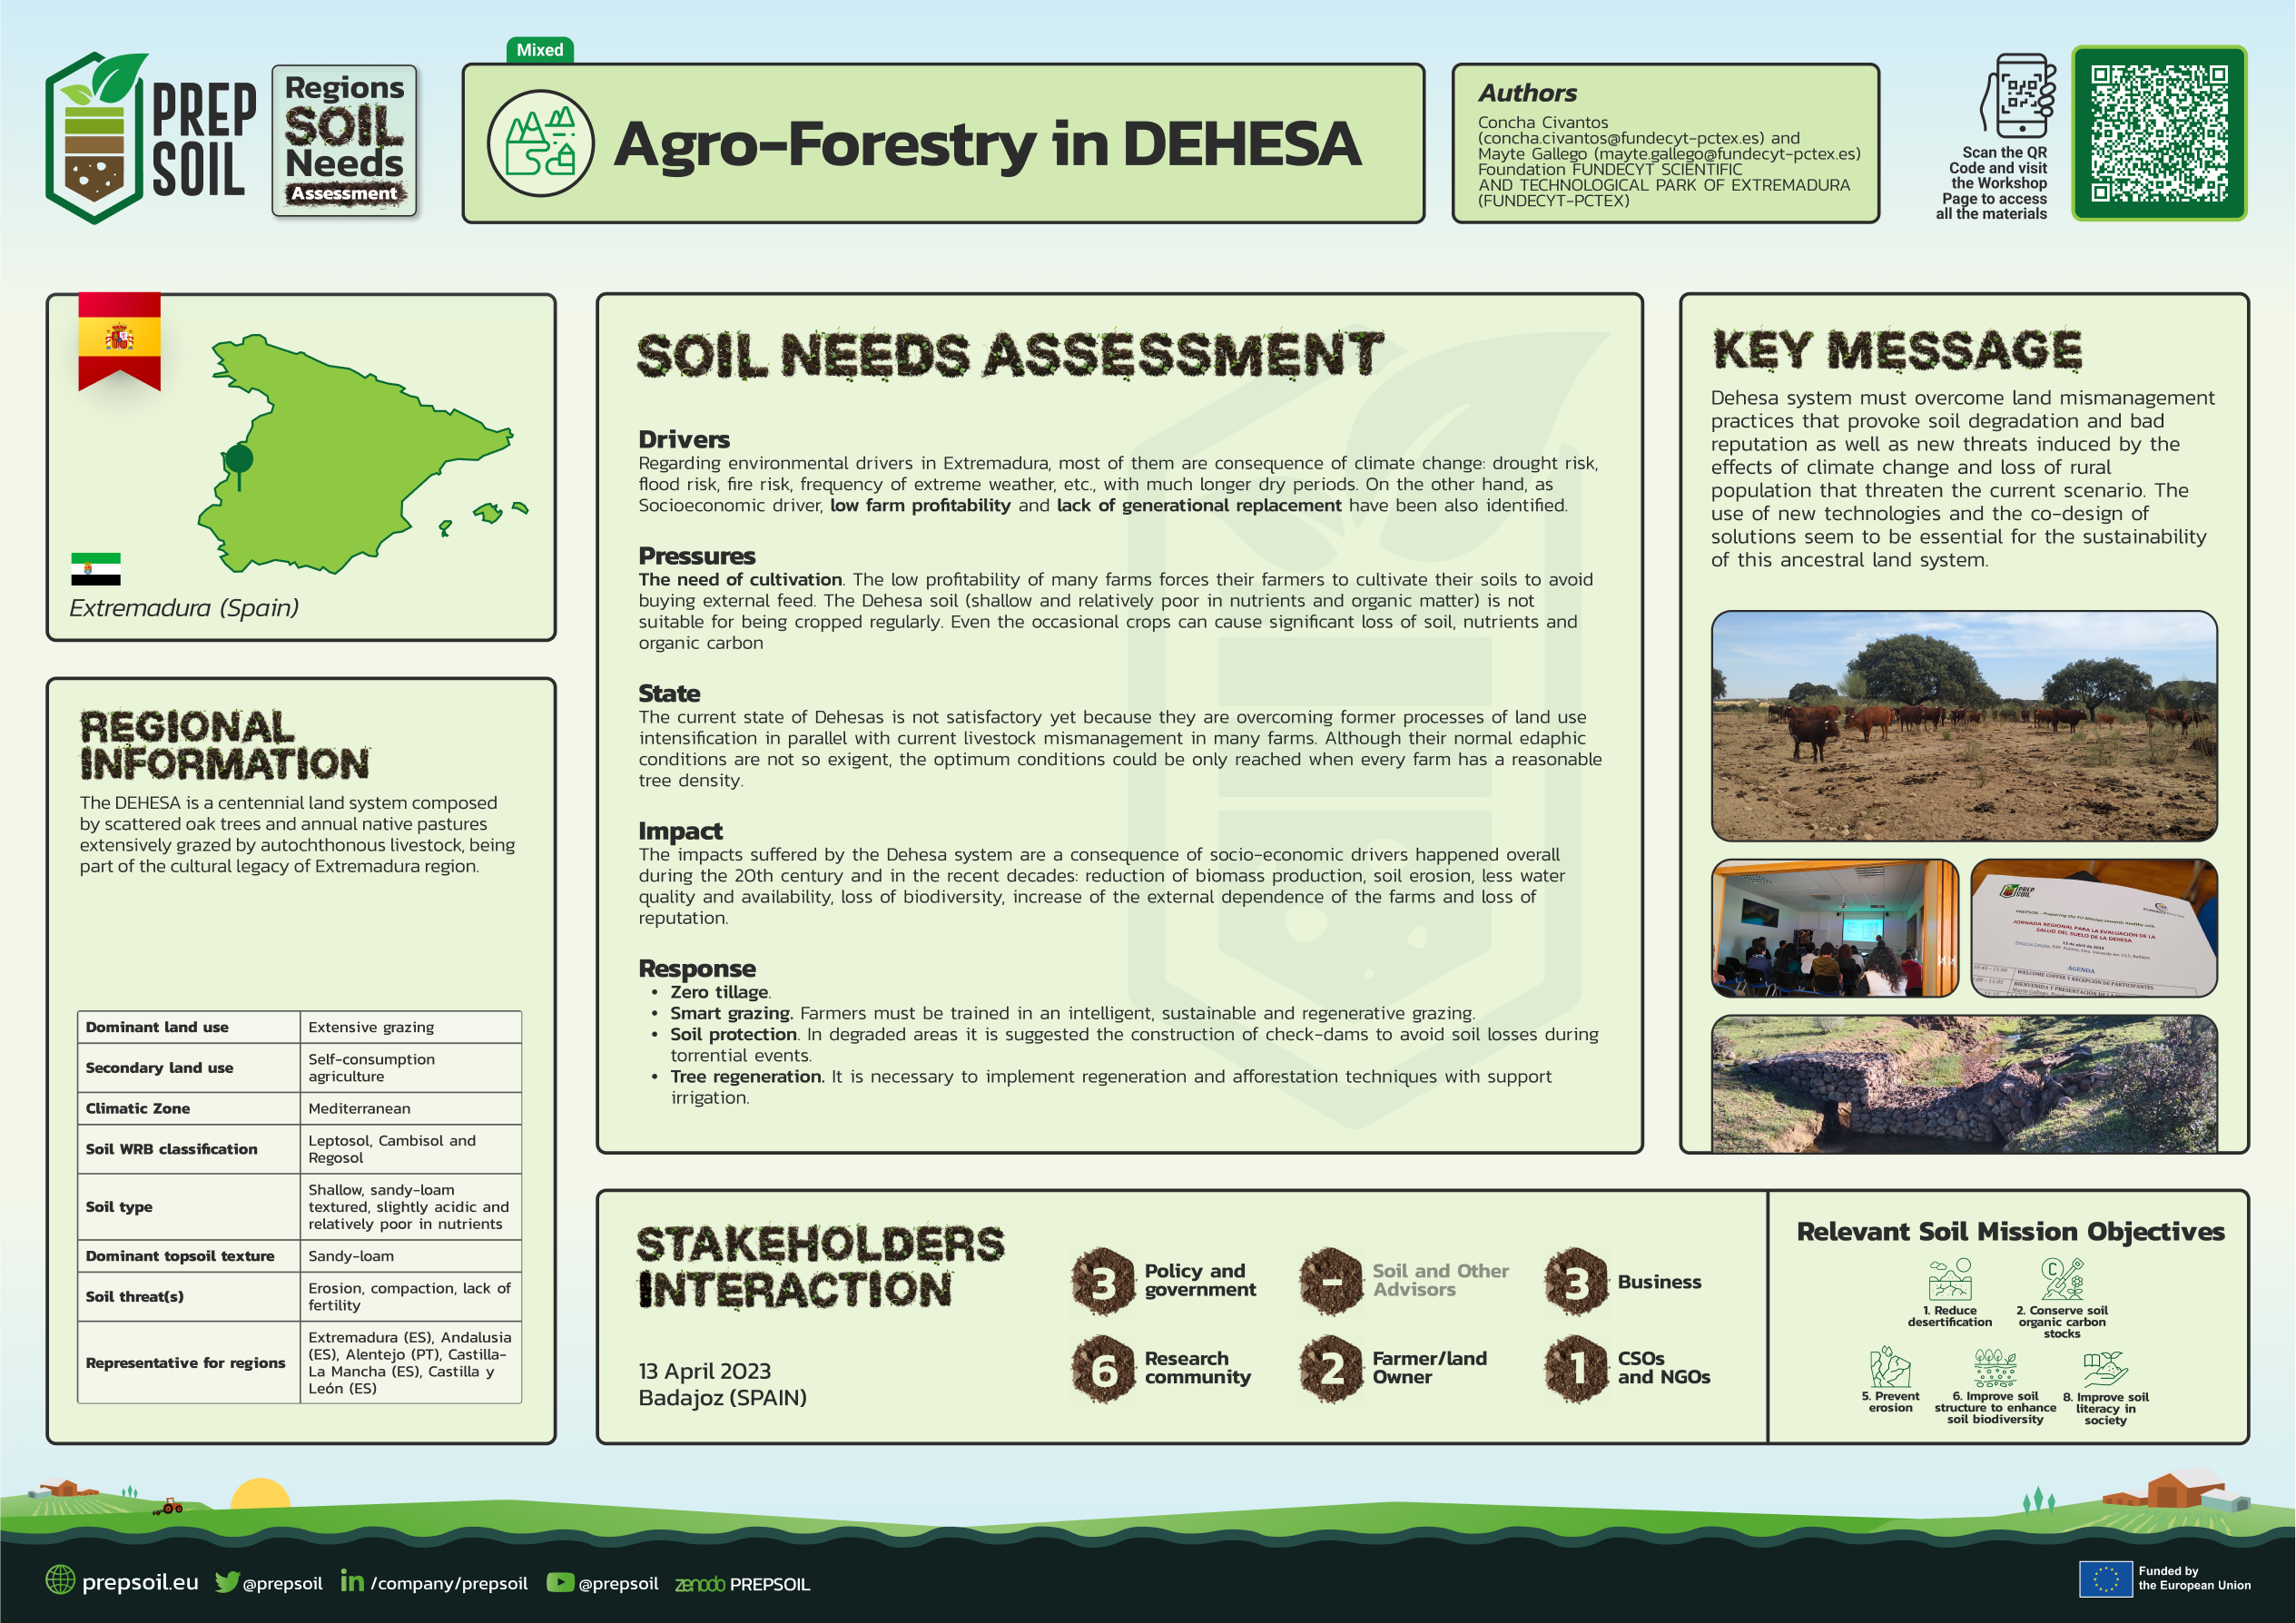 Agro-Forestry in DEHESA - Extremadura (Spain)